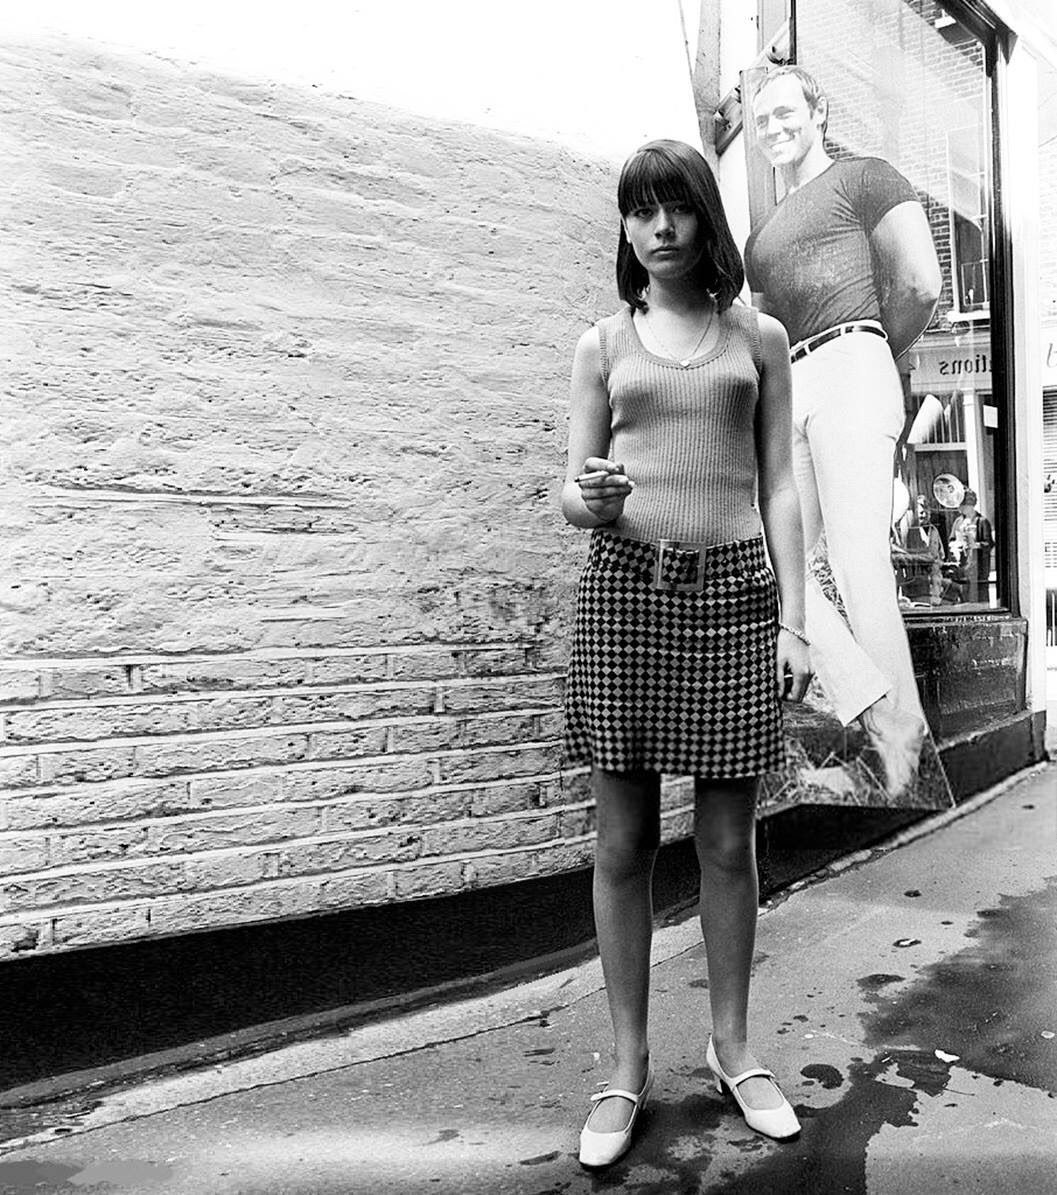 A British model wearing an optical miniskirt posing in front of John Stephen's clothes shop 'Trecamp'. She has an asymmetric haircut launched by Vidal Sassoon. London, 1967.  Photo by Mario De Biasi.
#carnabystreet #chelsea #swinginglondon #60s